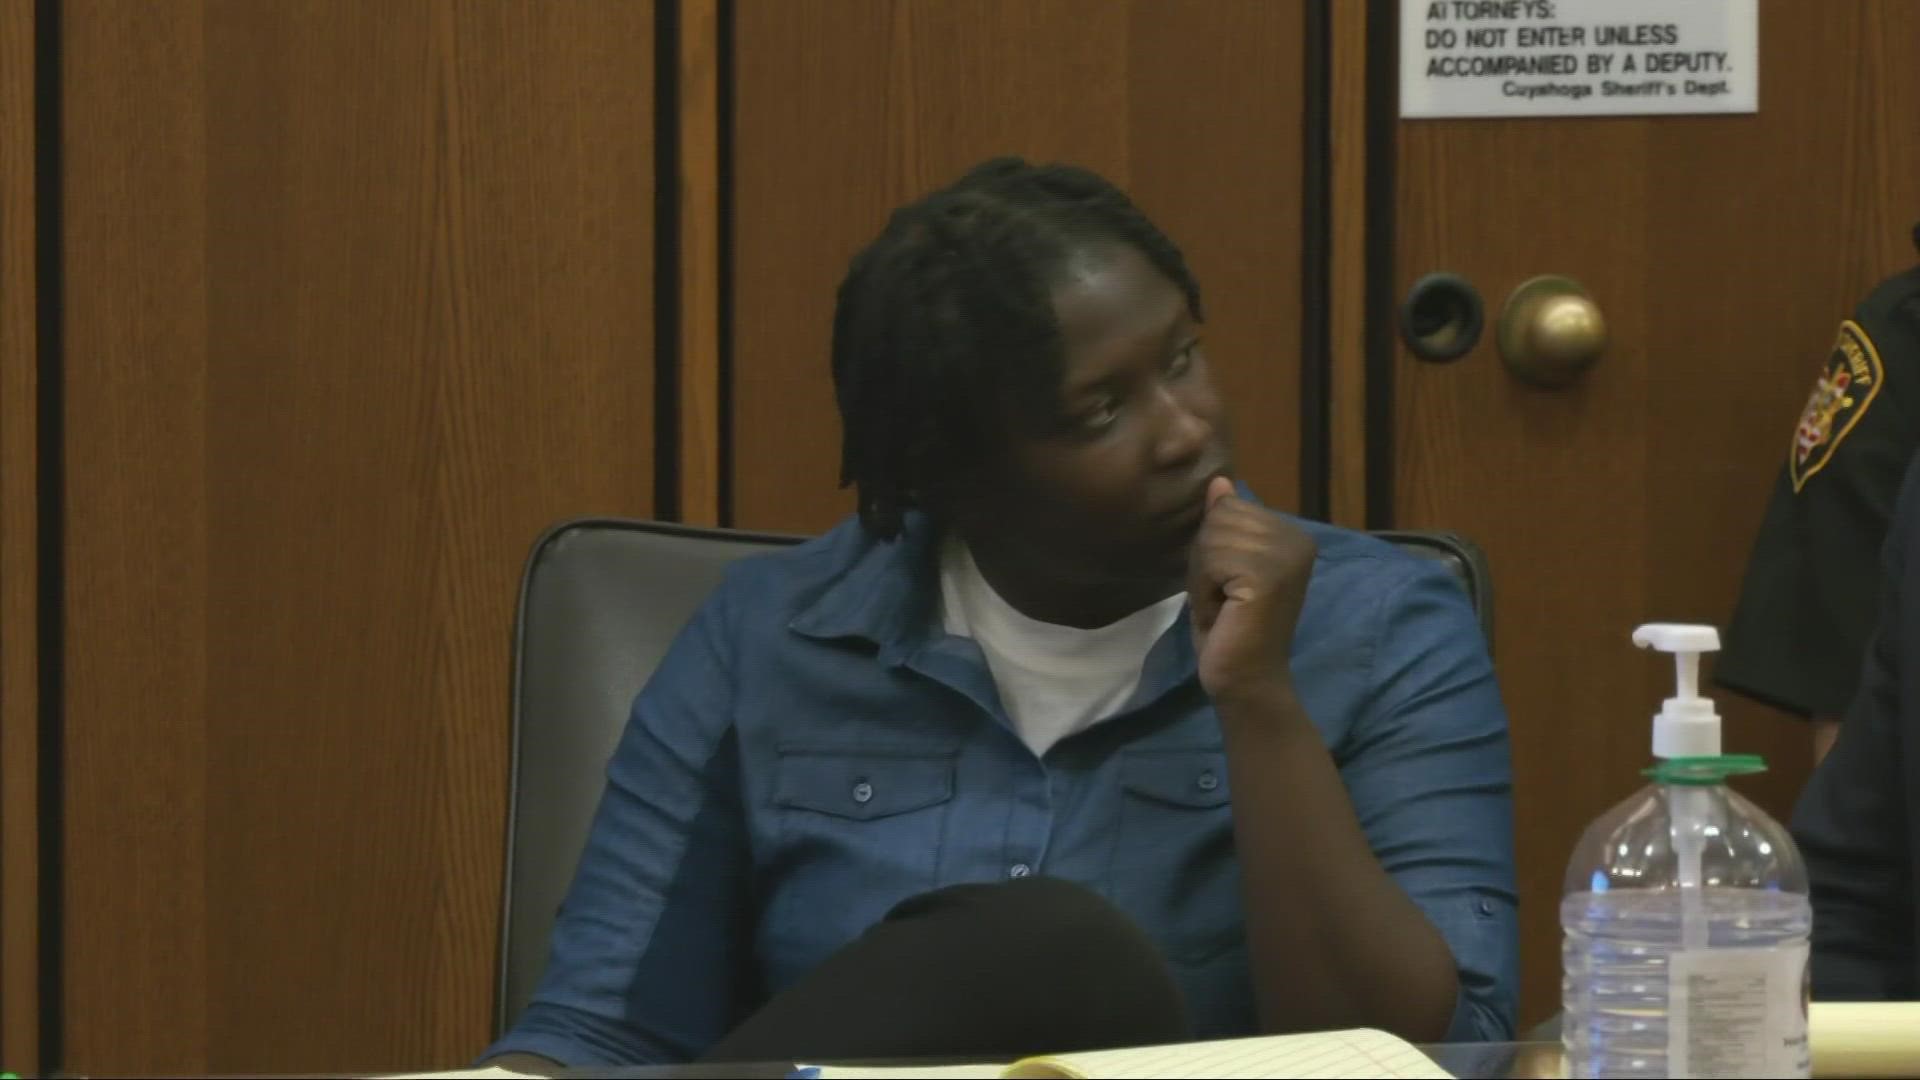 Closing arguments have ended, and Tamara McLoyd could spend 20 years to life in prison if convicted of Bartek's New Year's Eve murder.